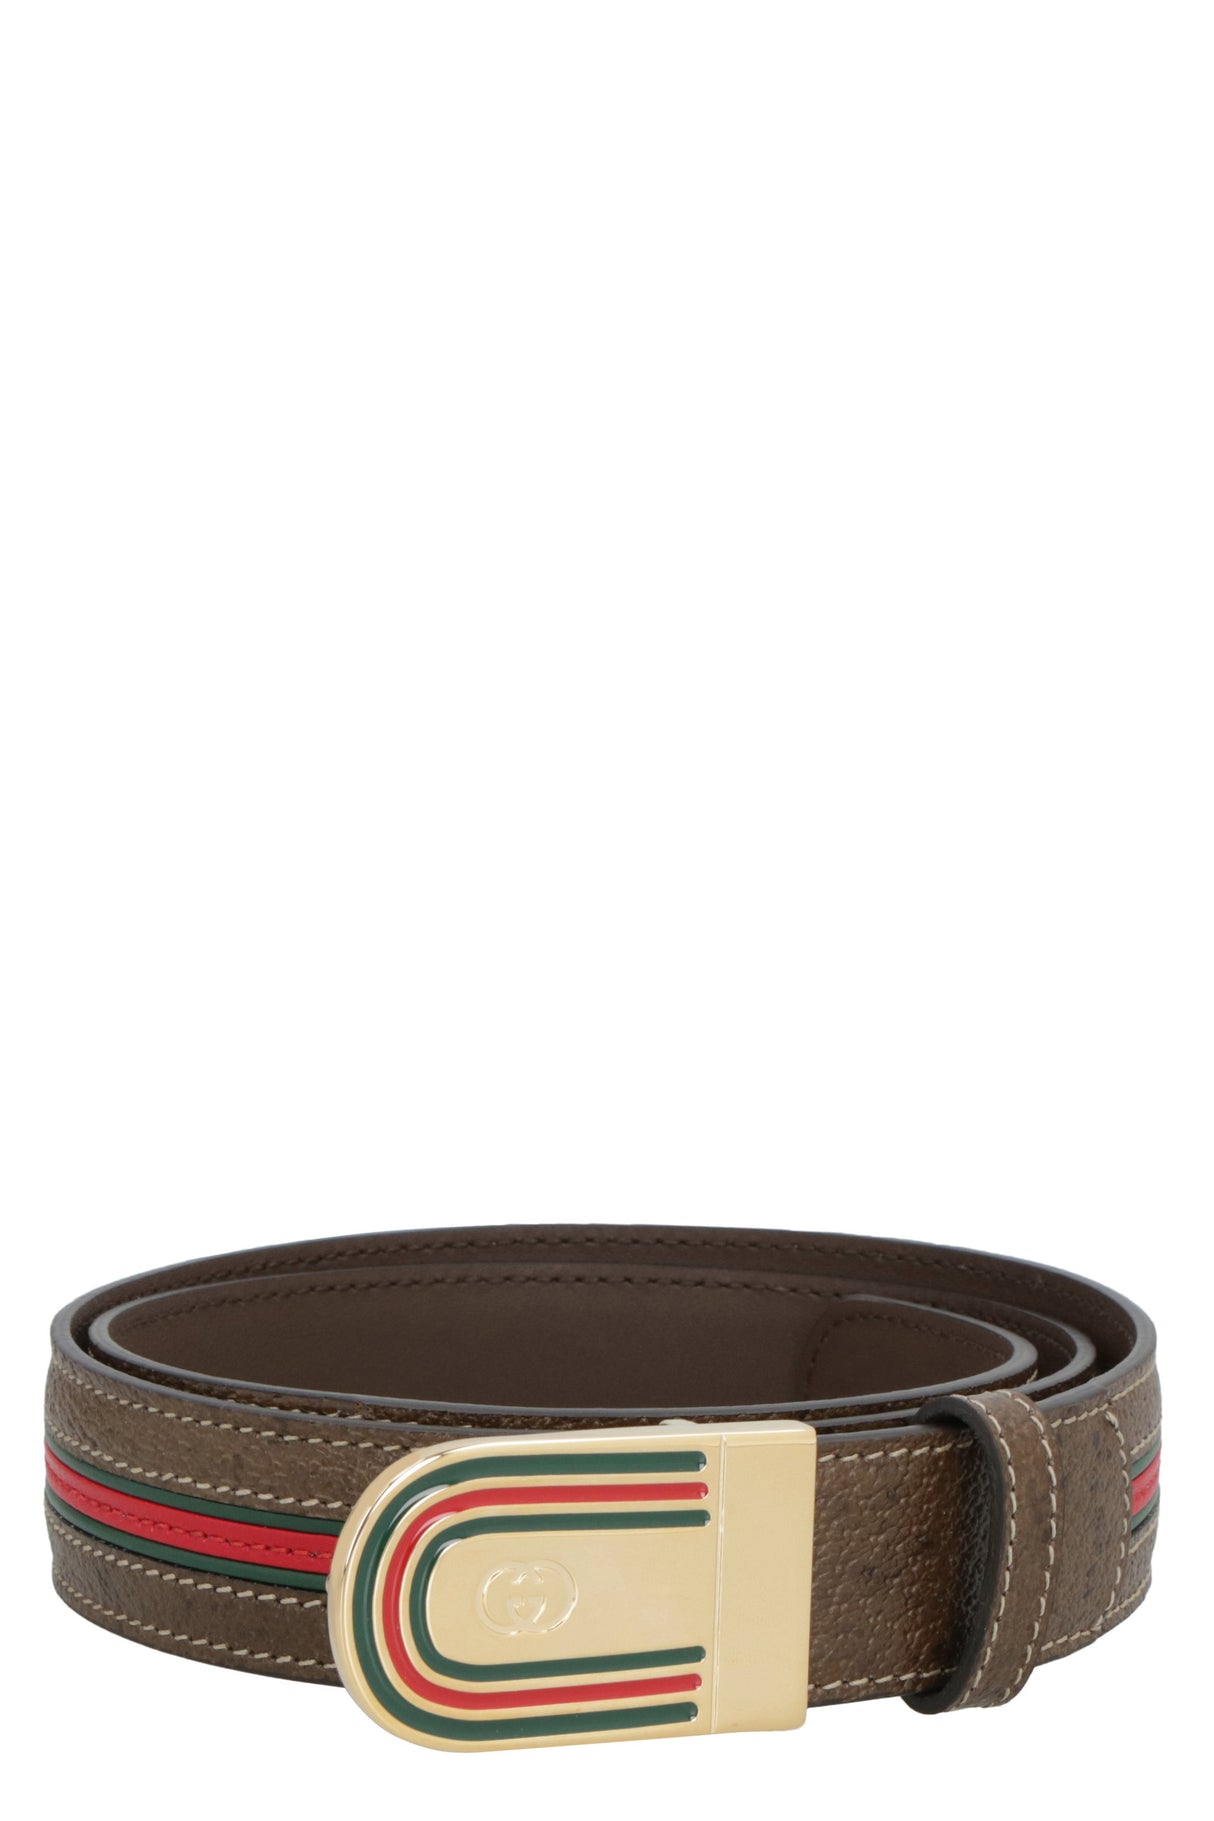 GUCCI Stylish Brown Leather Belt for Men - SS23 Collection